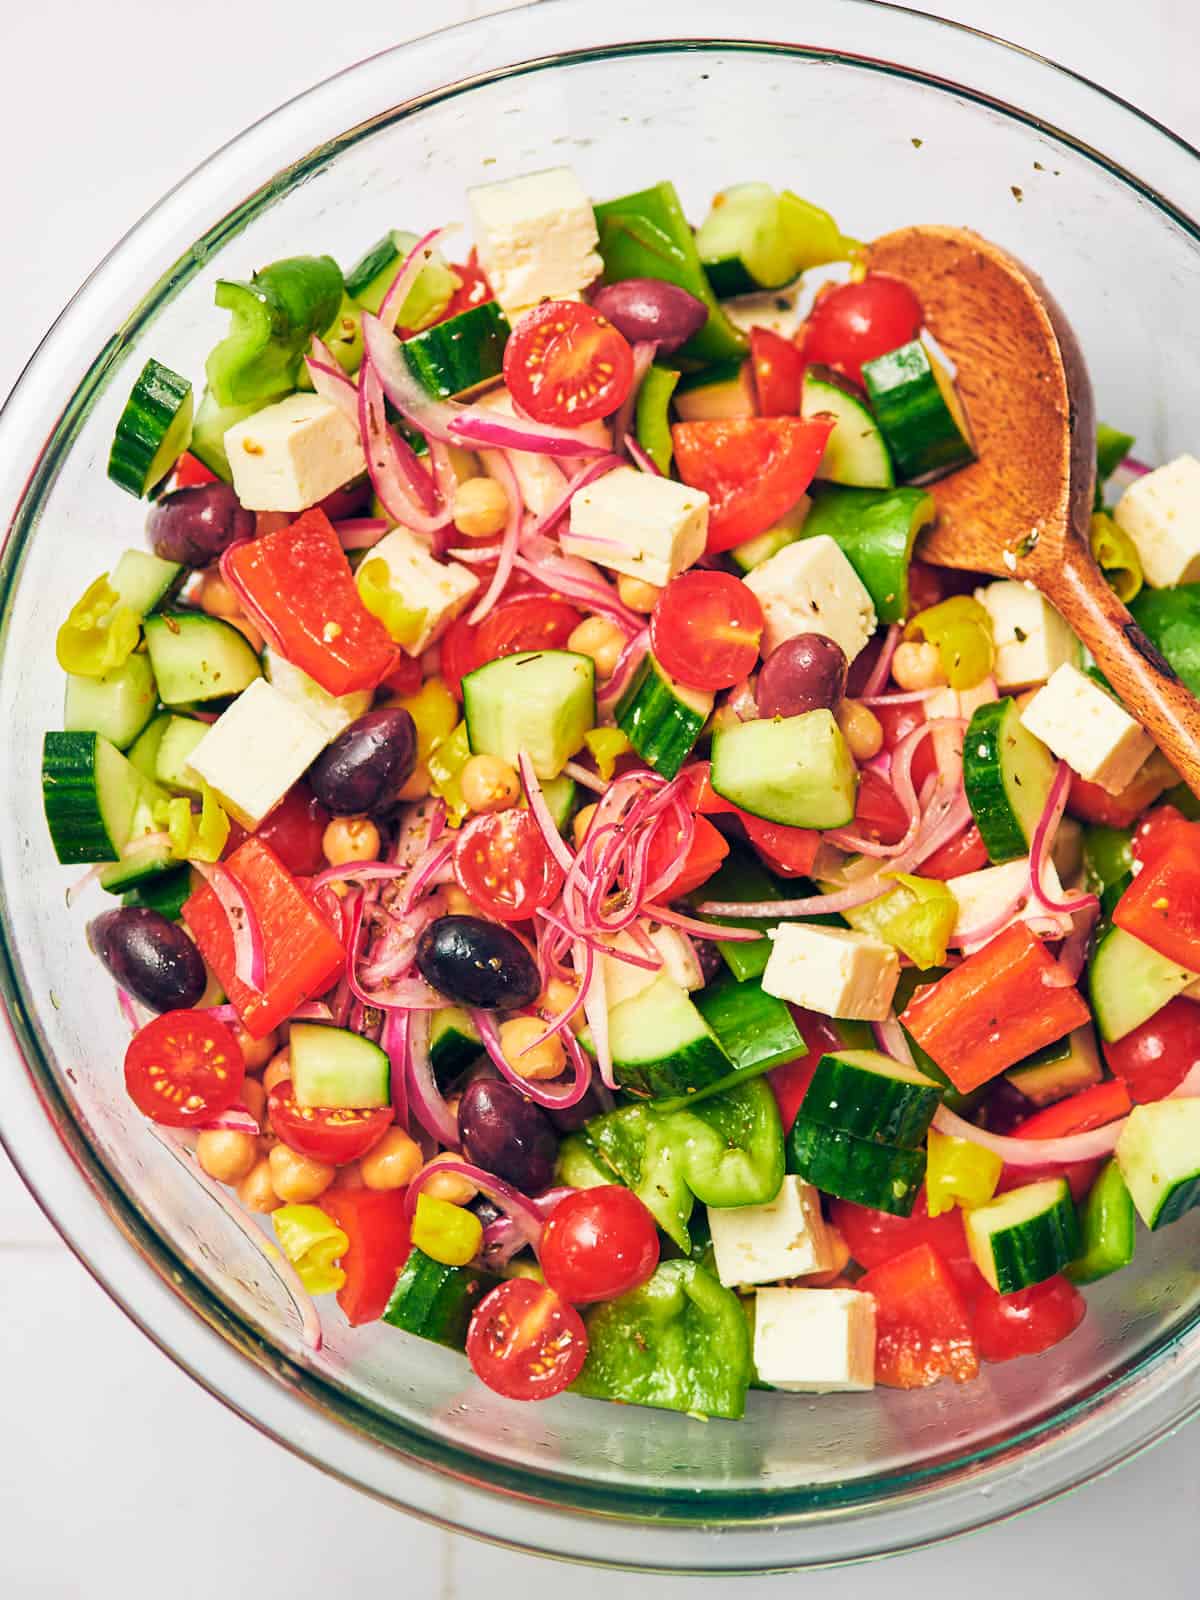 Greek salad in a large glass bowl.